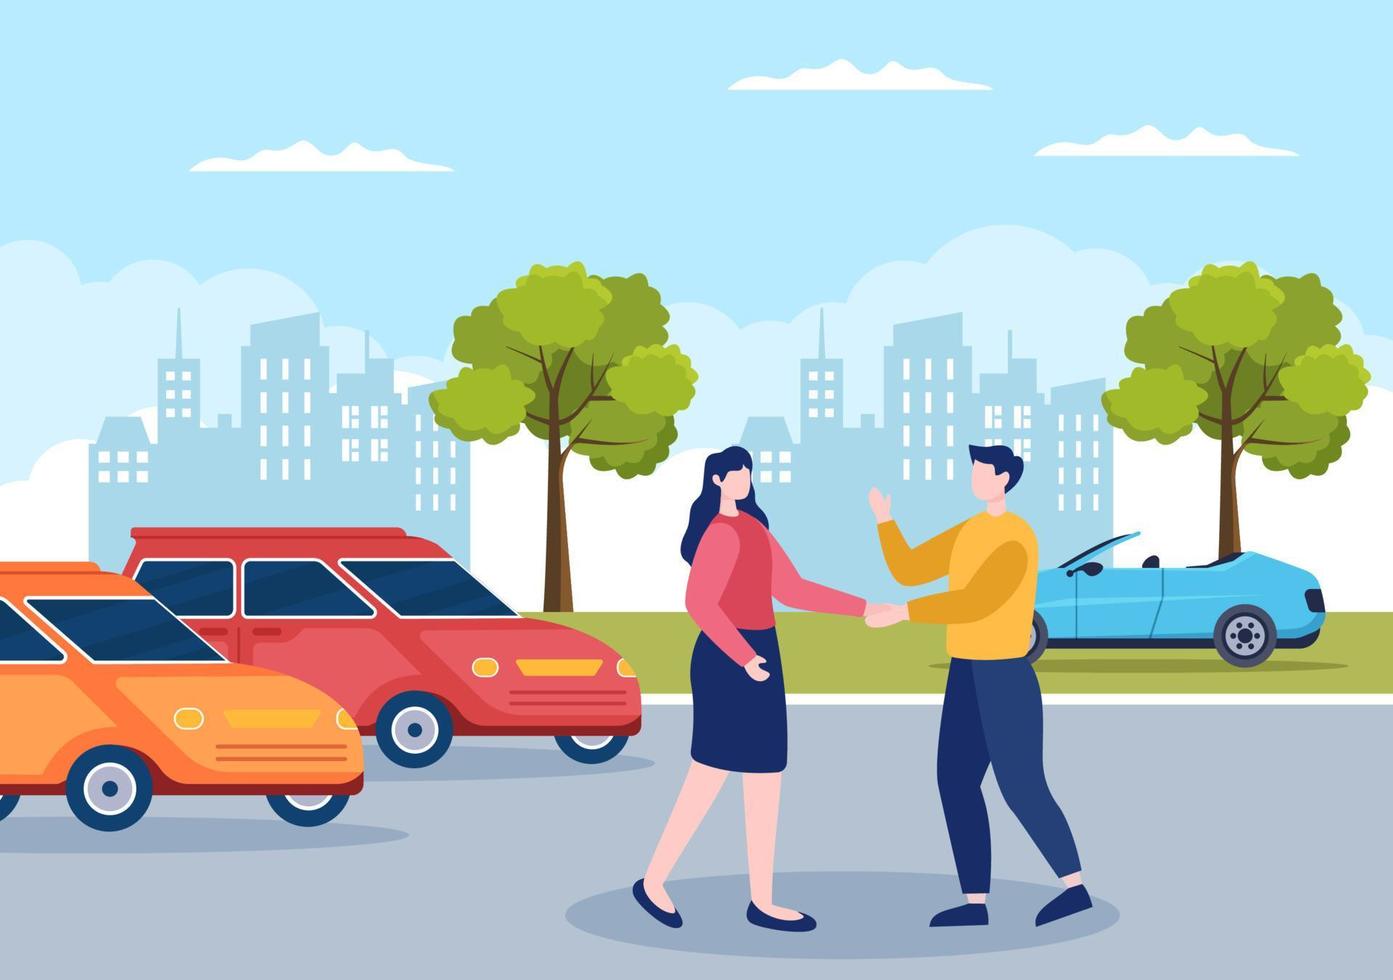 Car Rental, Booking Reservation and Sharing using Service Mobile Application with Route or Points Location in Hand Drawn Cartoon Flat Illustration vector